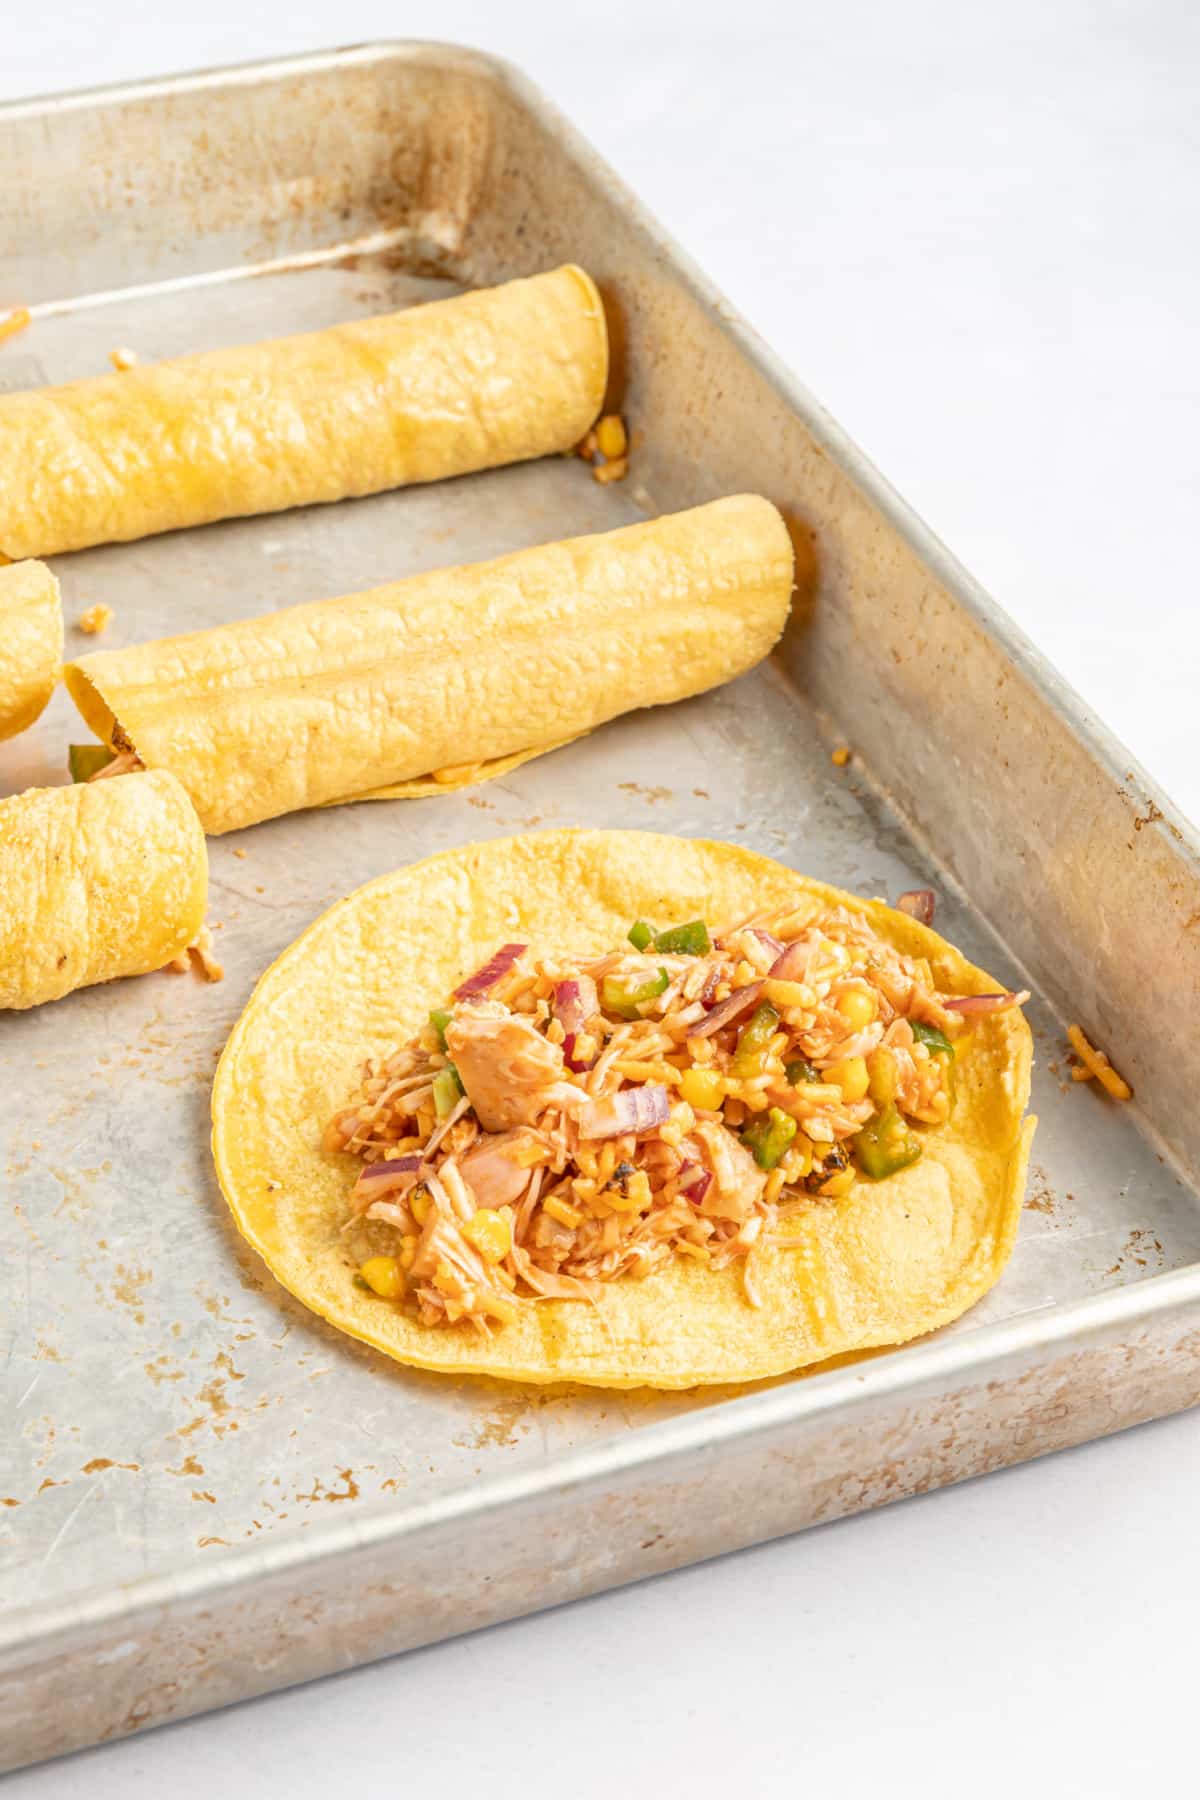 A baking sheet of filled and rolled taquitos, one tortilla laying open flat to show filling inside.